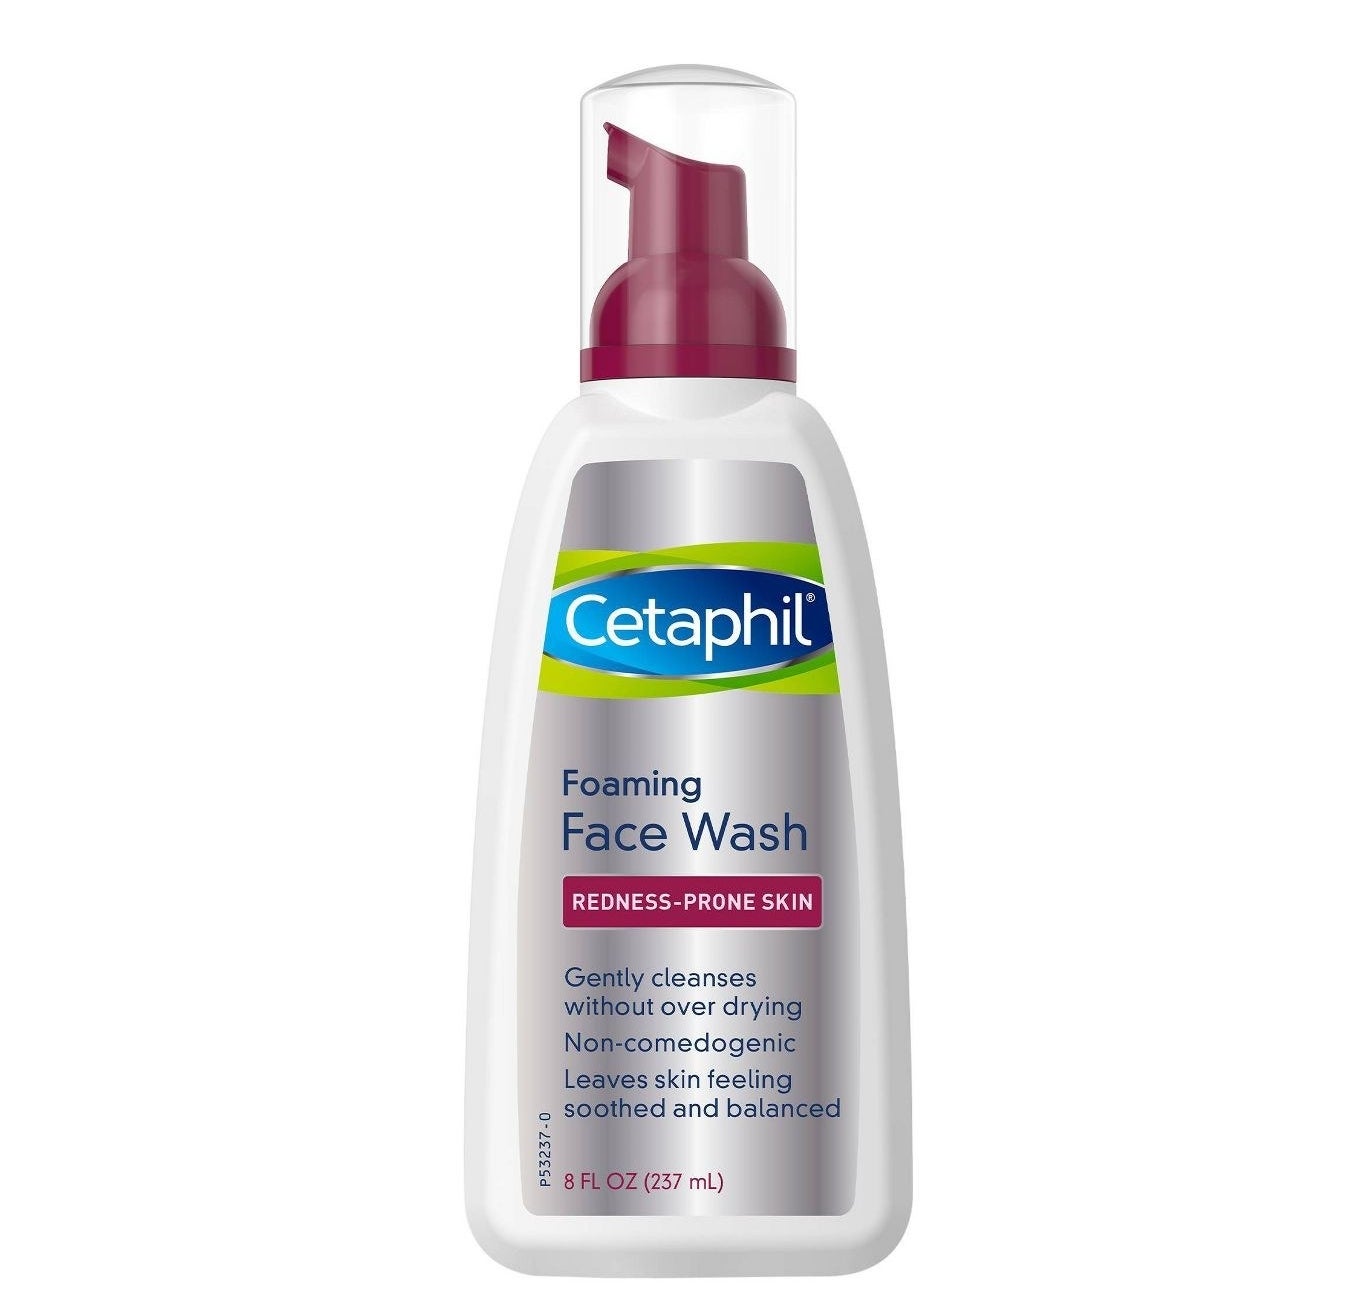 The Cetaphil redness prone foaming face wash